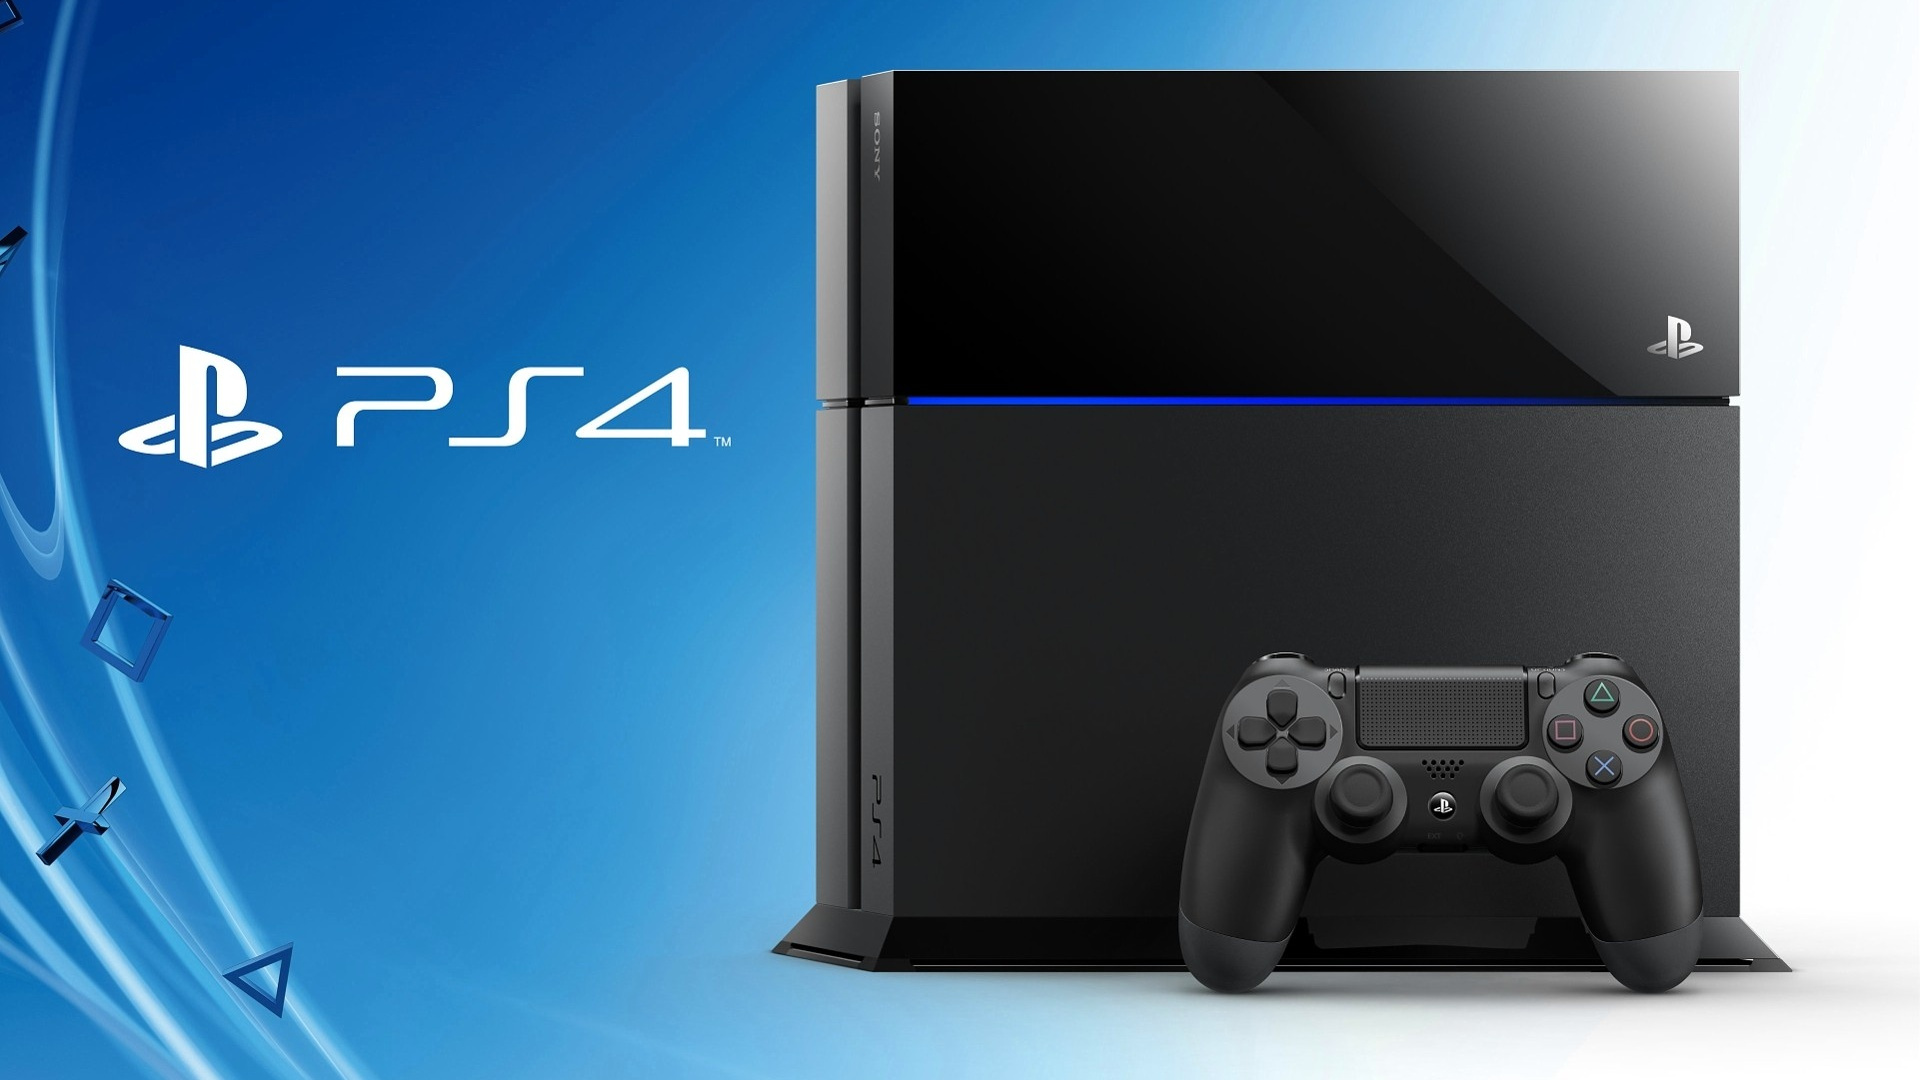 http://images.pushsquare.com/news/2014/01/sony_our_focus_is_on_ps4_stock_levels_so_people_can_experience_next_gen/attachment/0/original.jpg